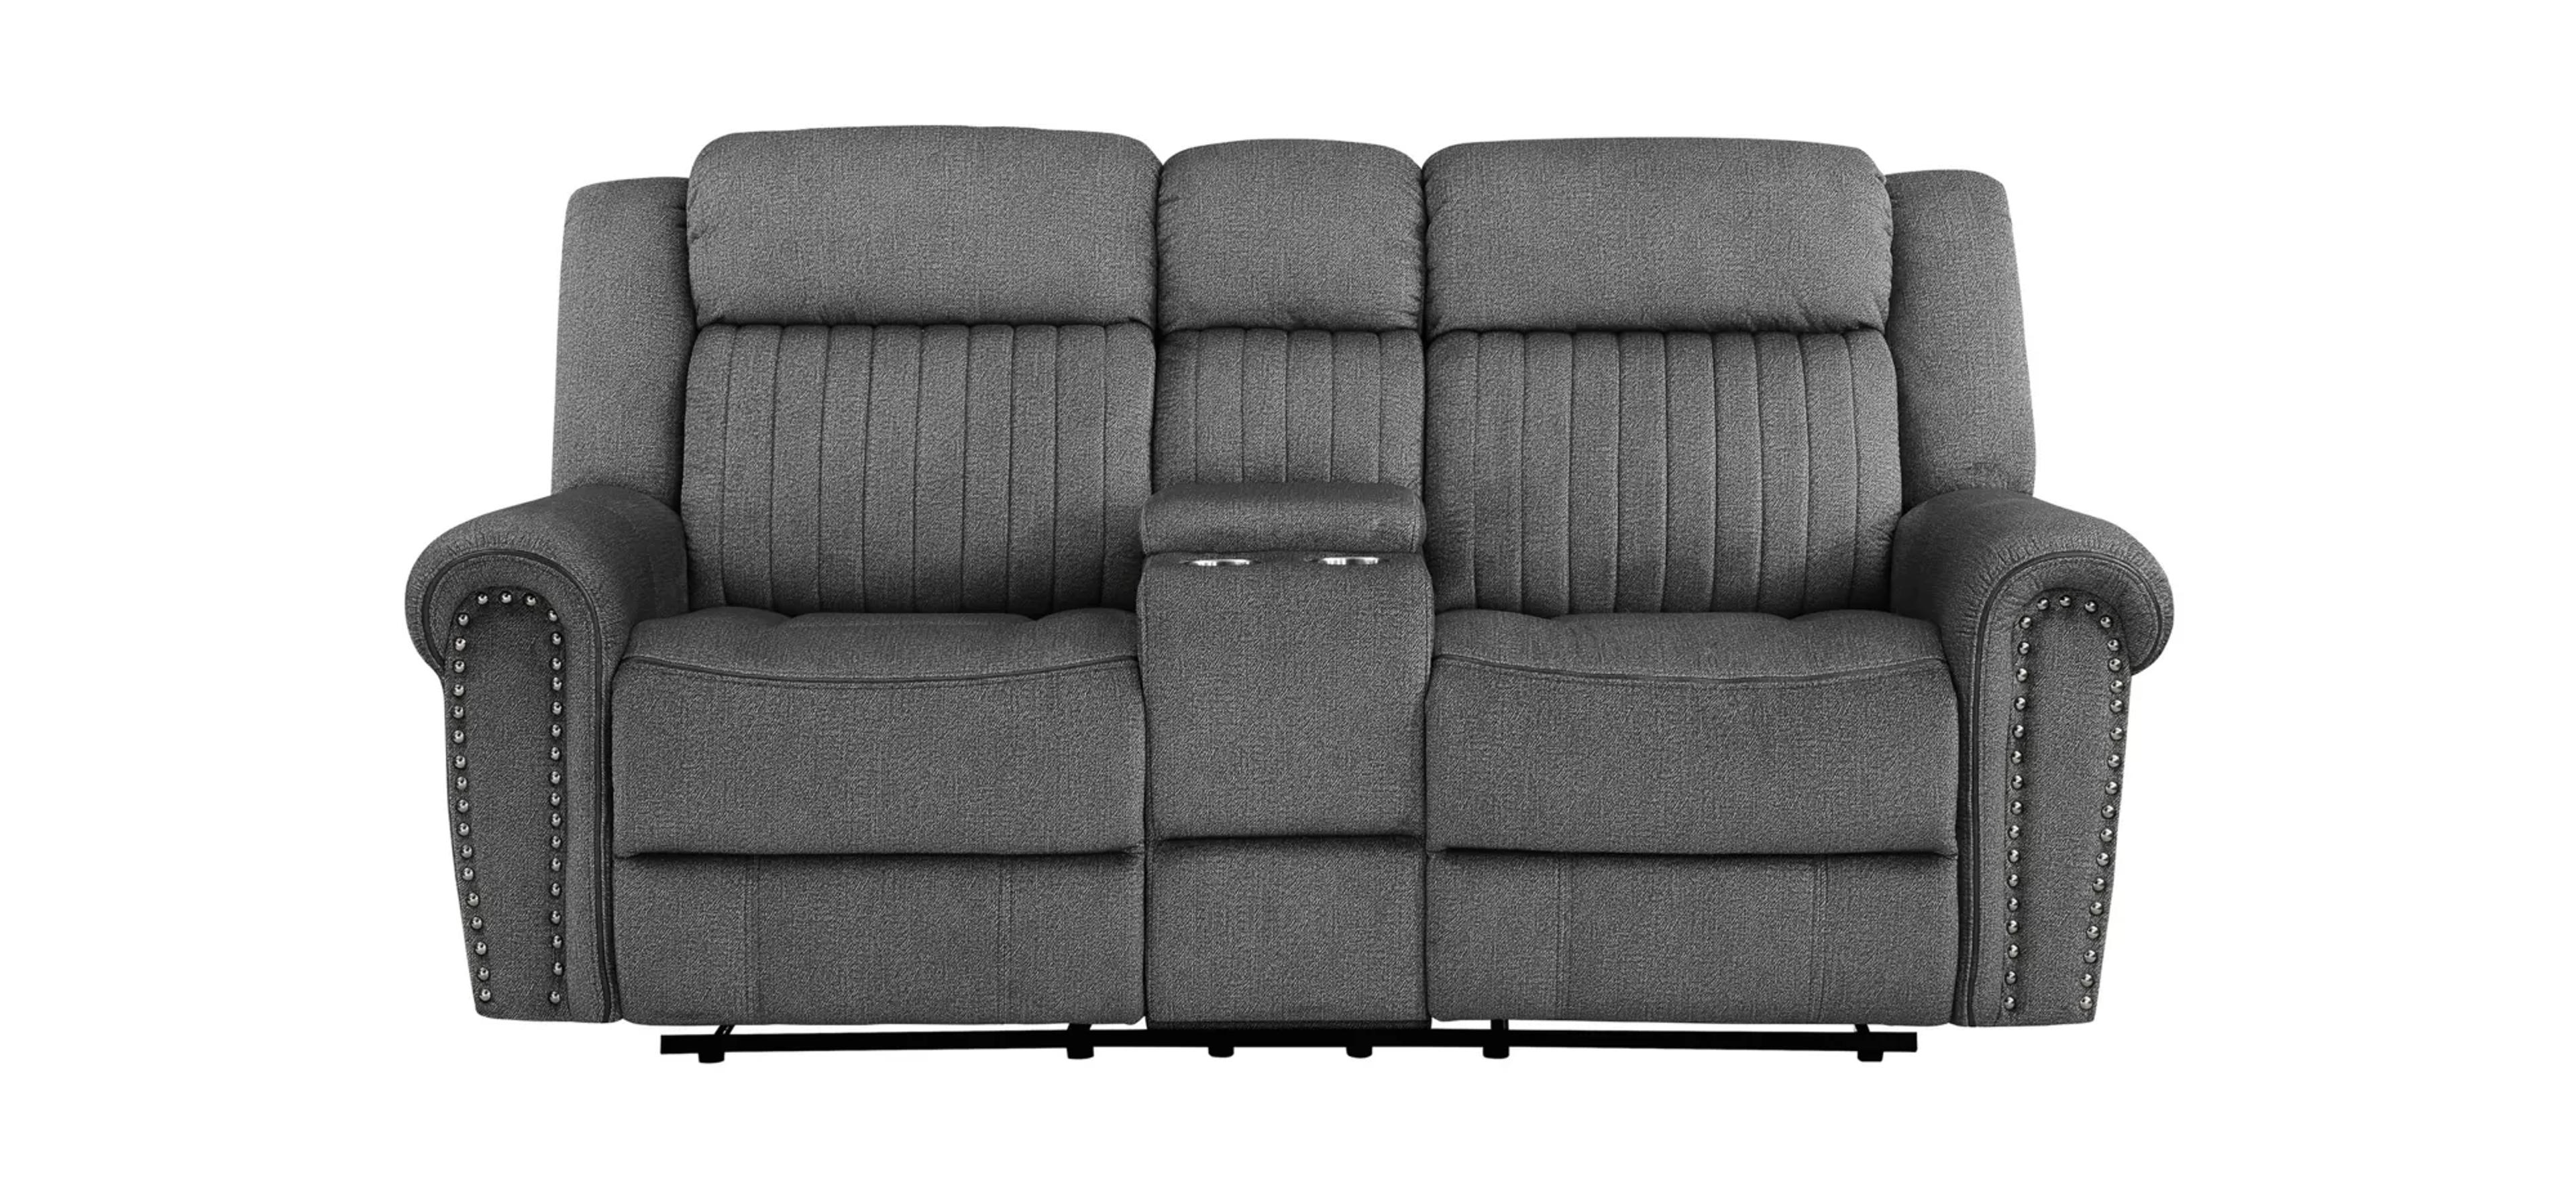 Lanning Double Reclining Loveseat with Center Console | Raymour & Flanigan